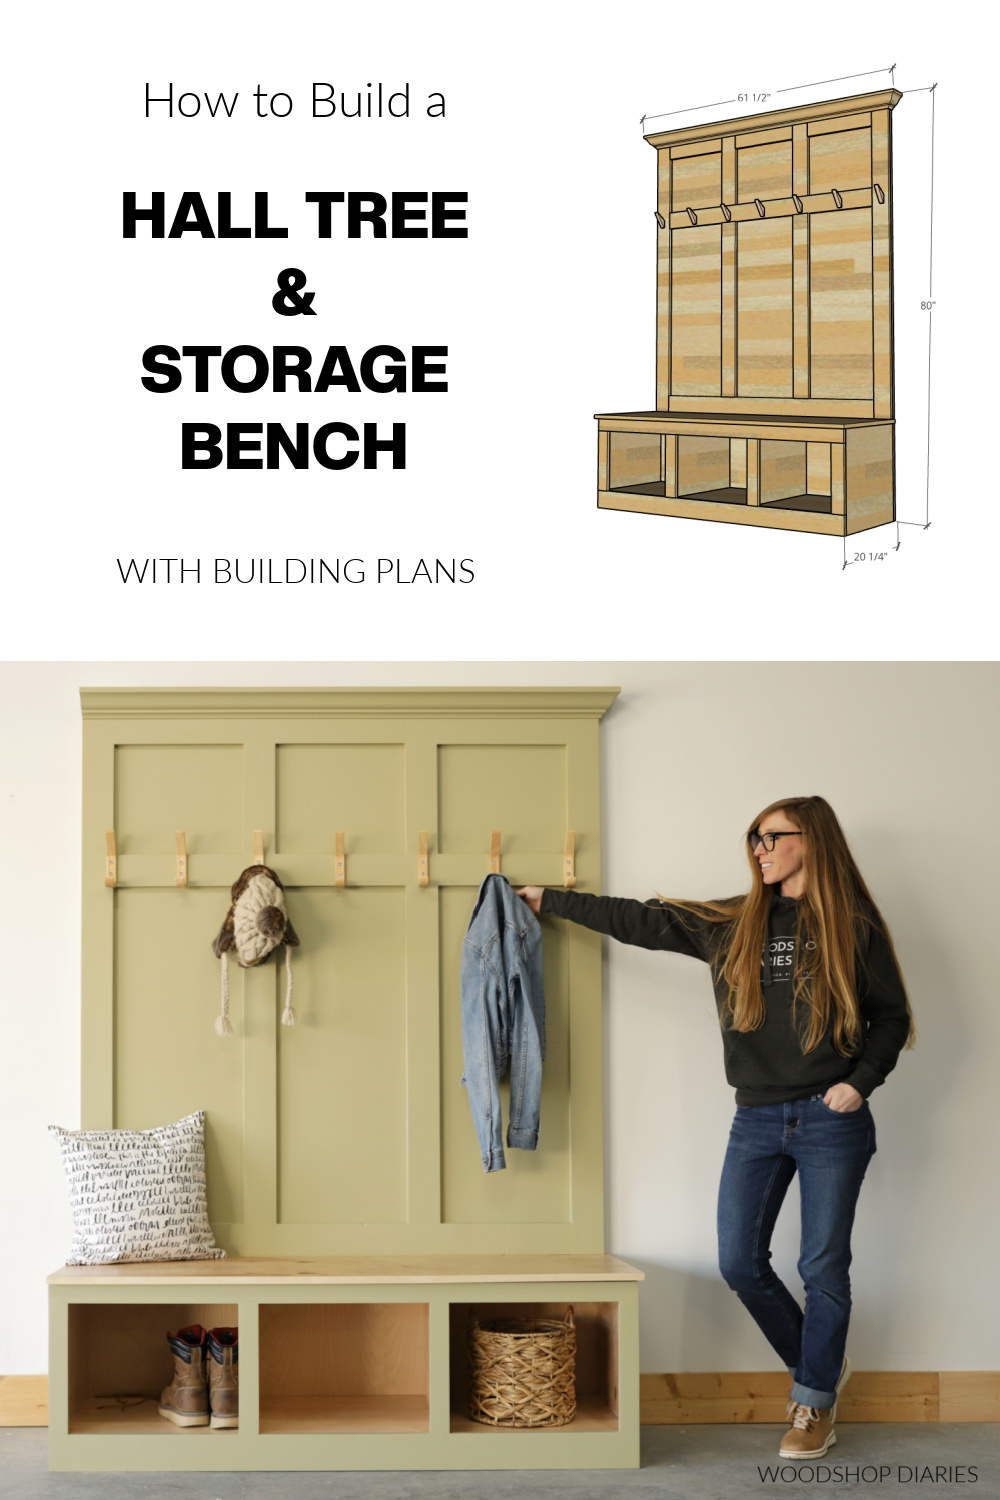 Pinterest collage showing overall dimensional diagram at top with completed hall tree storage bench at bottom with text "how to build a hall tree & storage bench with building plans"